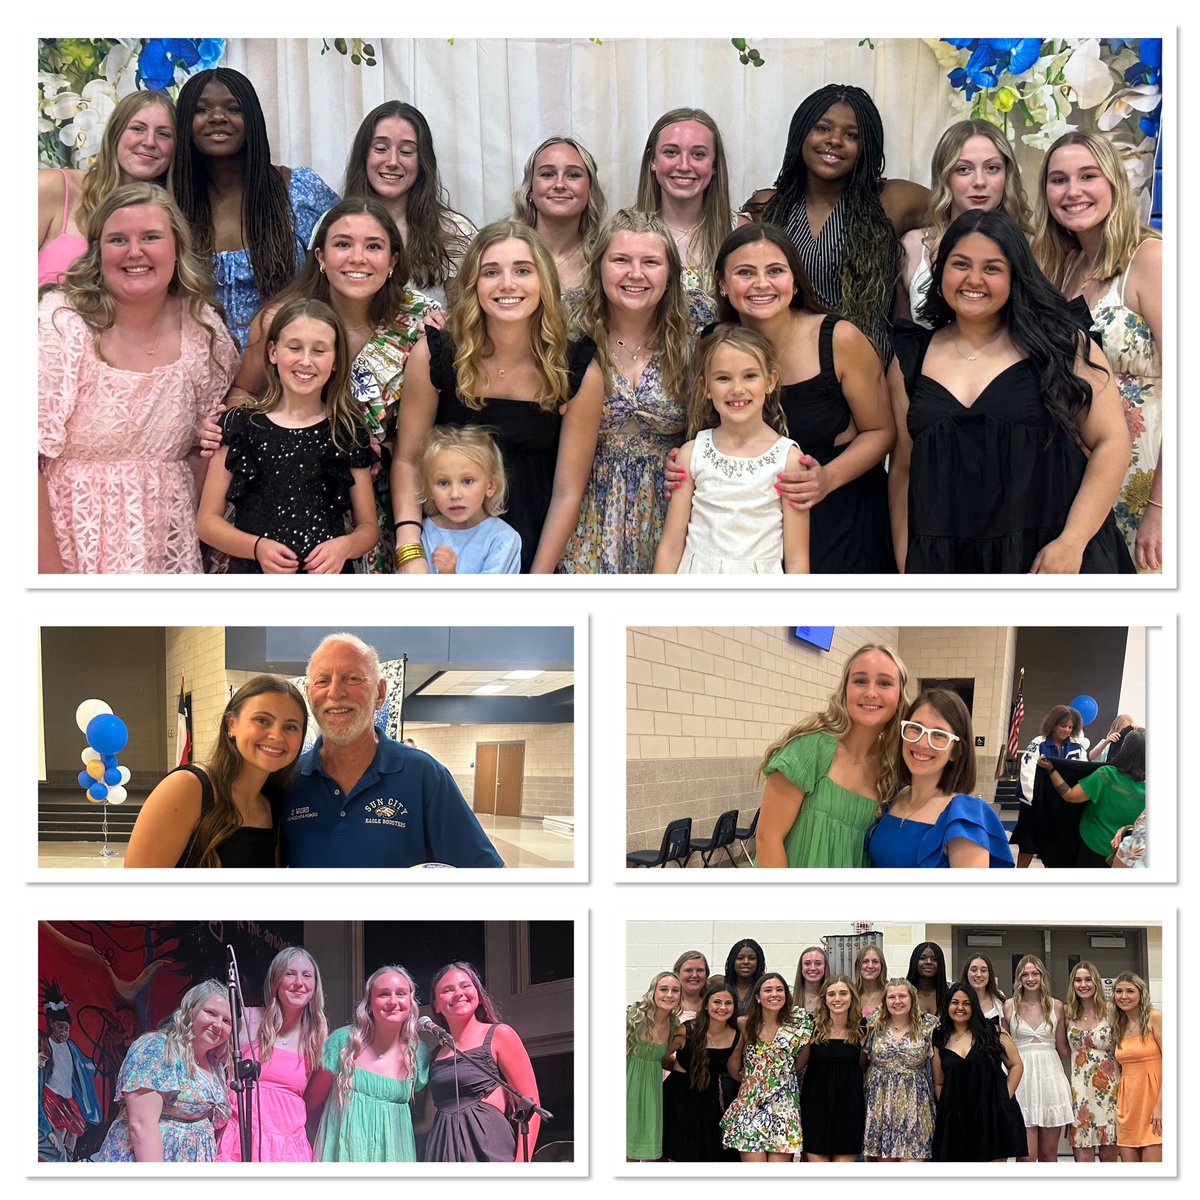 INCREDIBLE WAY to end a great season with our Lady Eagle Celebration—gals looked beautiful & was rewarding to watch them lift each other up & relish in each other’s accomplishments. But tonight was about recognizing amazing relationships forged during our time together #EFND💙